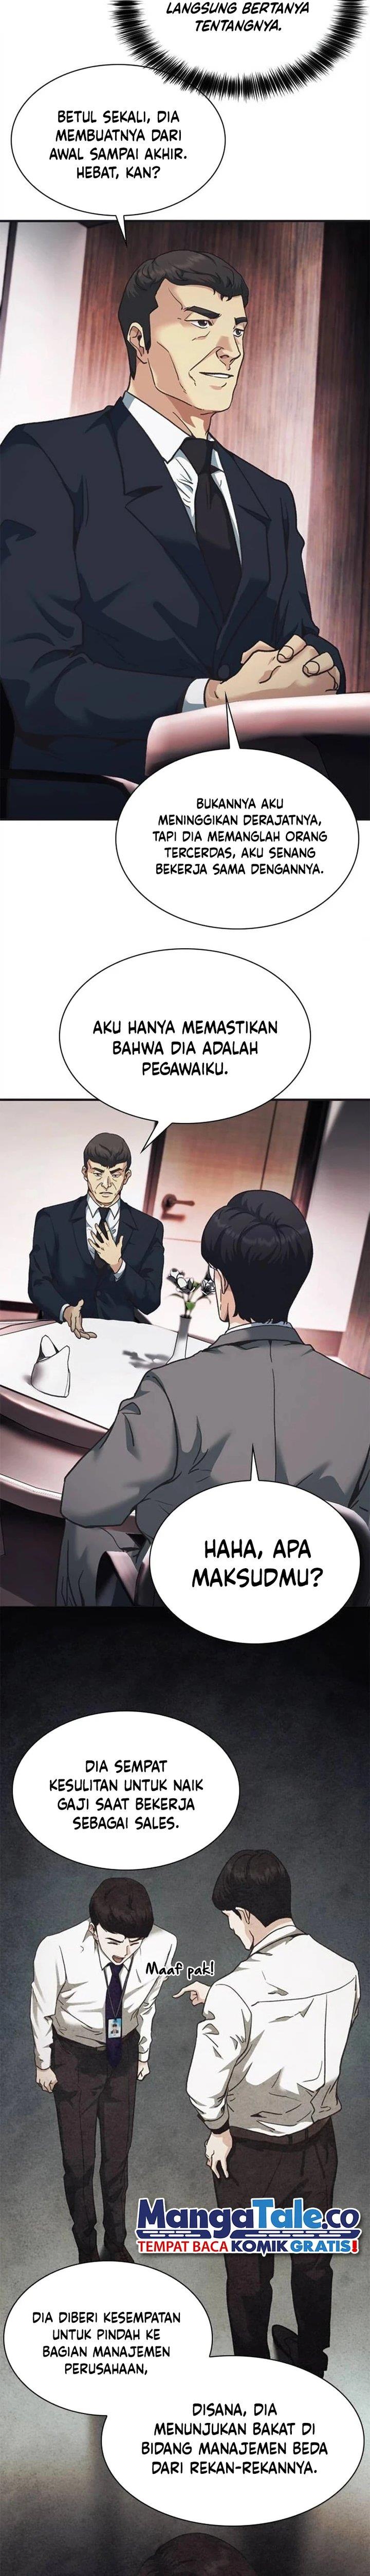 Chairman Kang, The New Employee Chapter 40